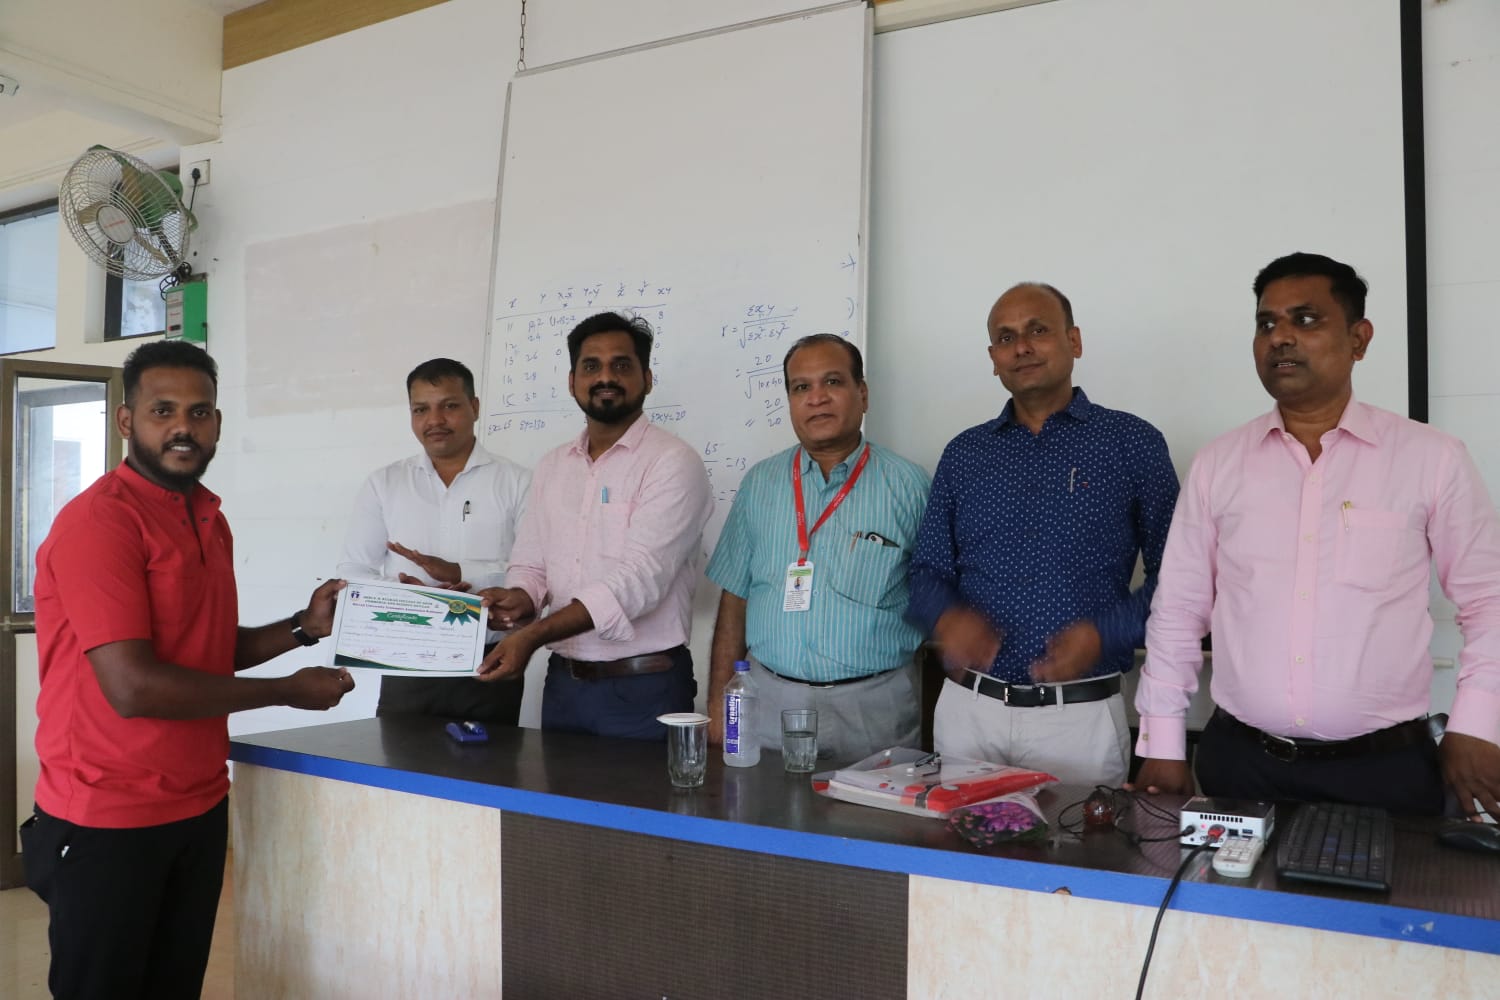 One Day workshop on Application of Research Methodology in Social science, Commerce, management and Science. Resource person:- Dr. Santoshkumar Yadav from Devchand College Arjunnagar.